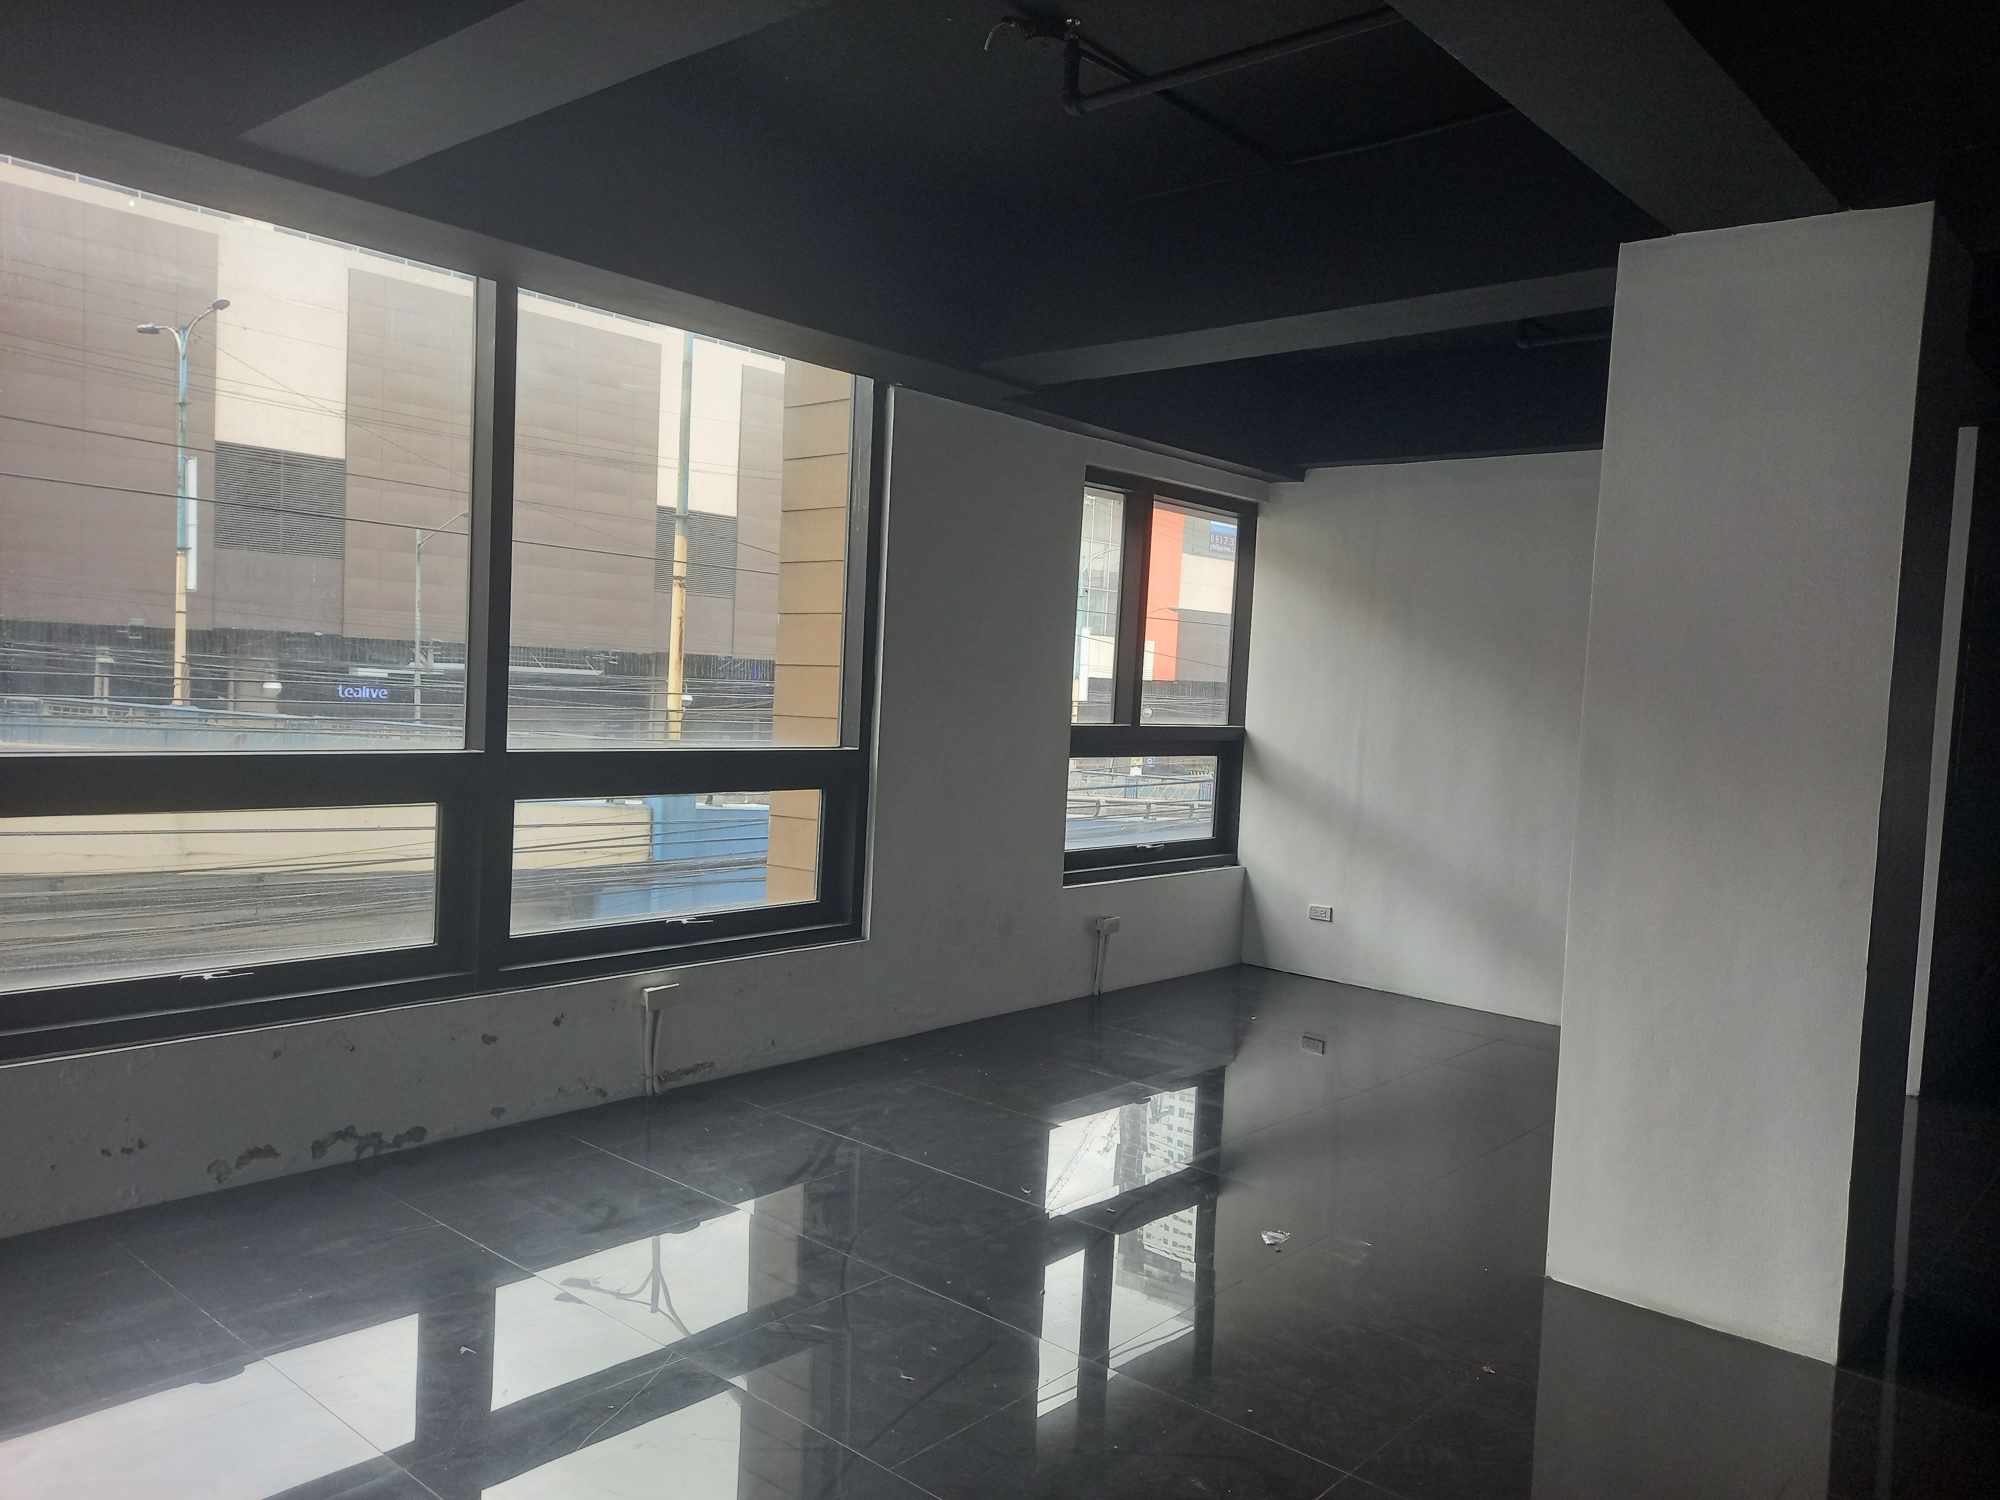 For Rent Lease Office Space Shaw Boulevard Mandaluyong City Manila